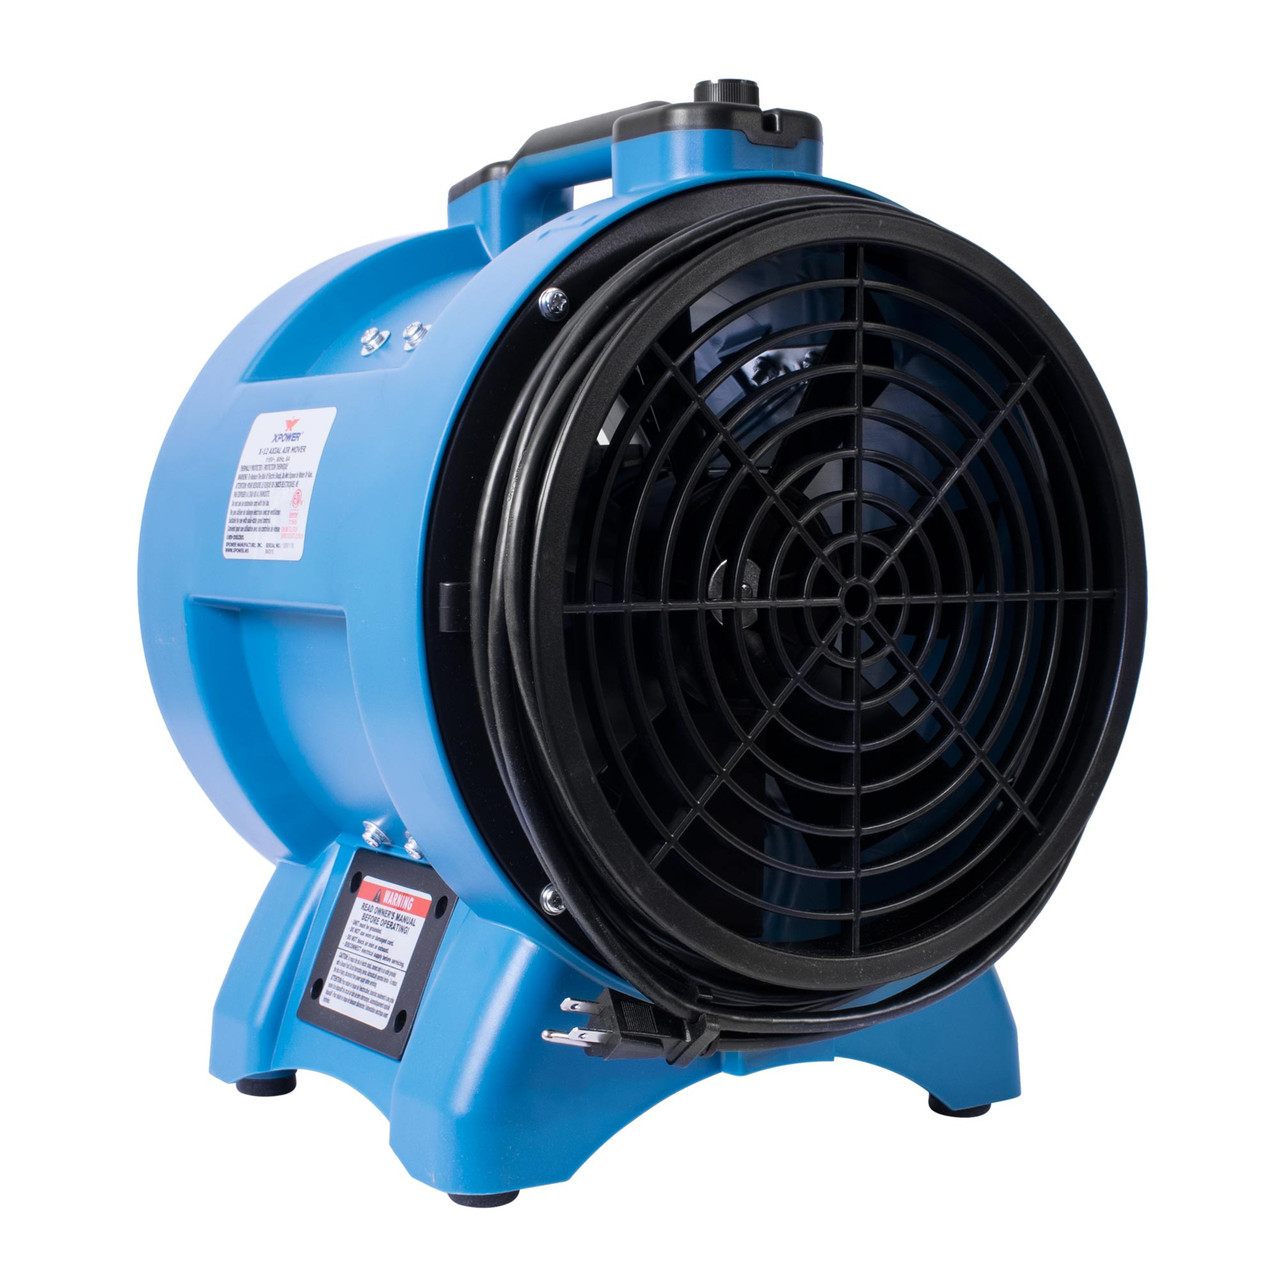 XPOWER X-12 Industrial Confined Space Fan (1/2 HP) FRONT